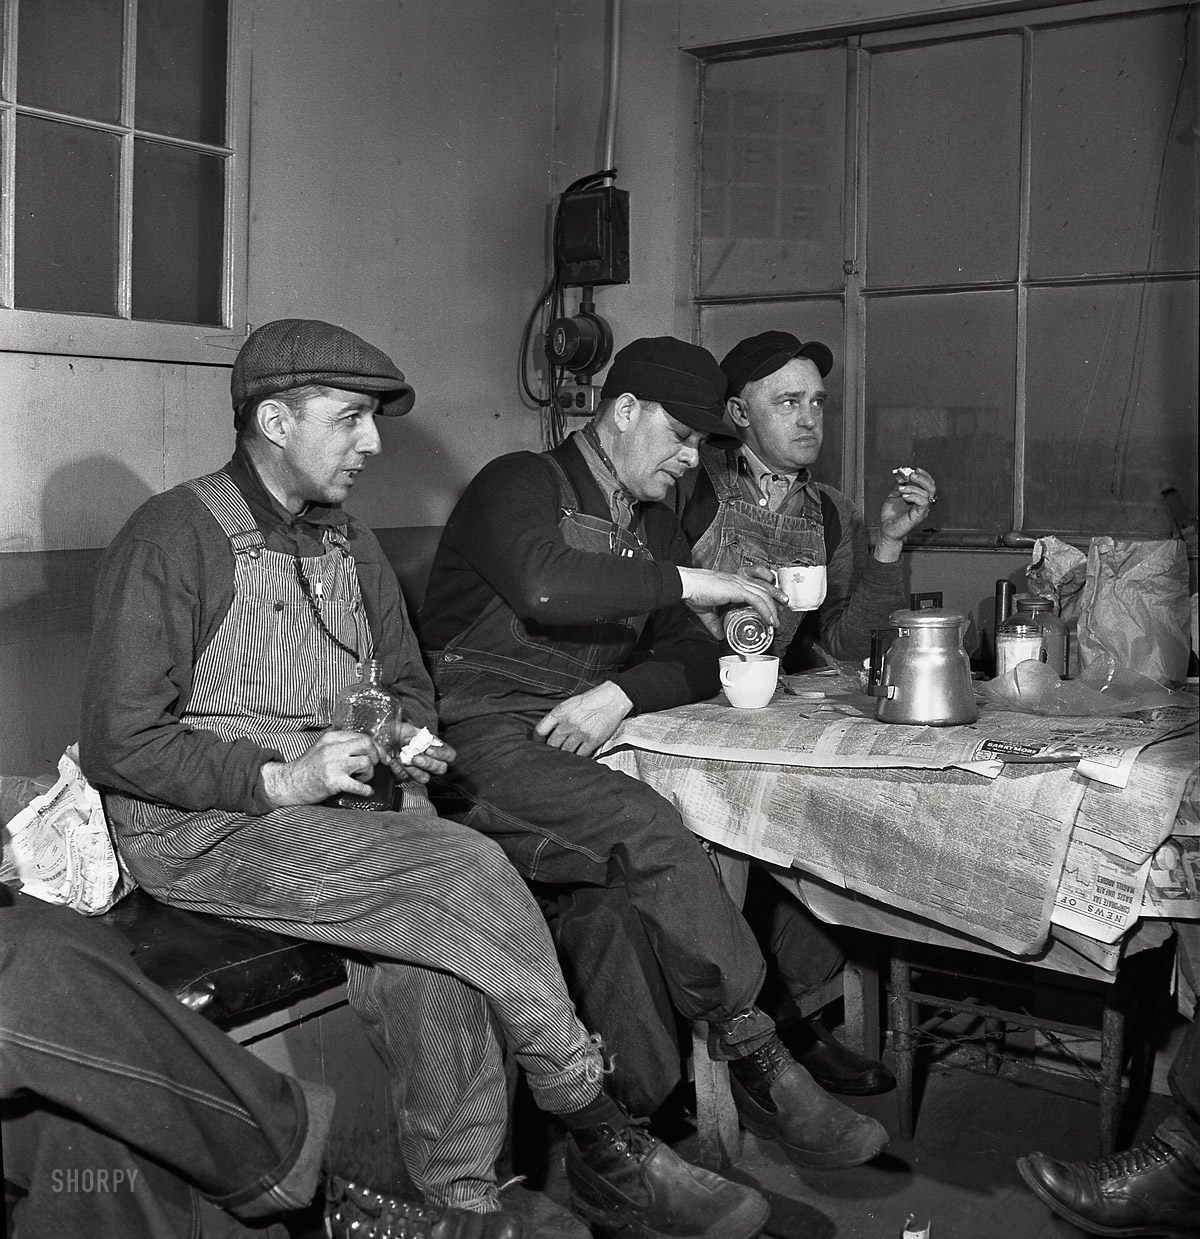 February 1943. "Daniel Senise (center) at lunch in the work shanty at an Indiana Harbor Belt Line rail yard. With him are switchmen John McCarthy (left) and E.H. Albrecht." Medium-format nitrate negative by Jack Delano. View full size.